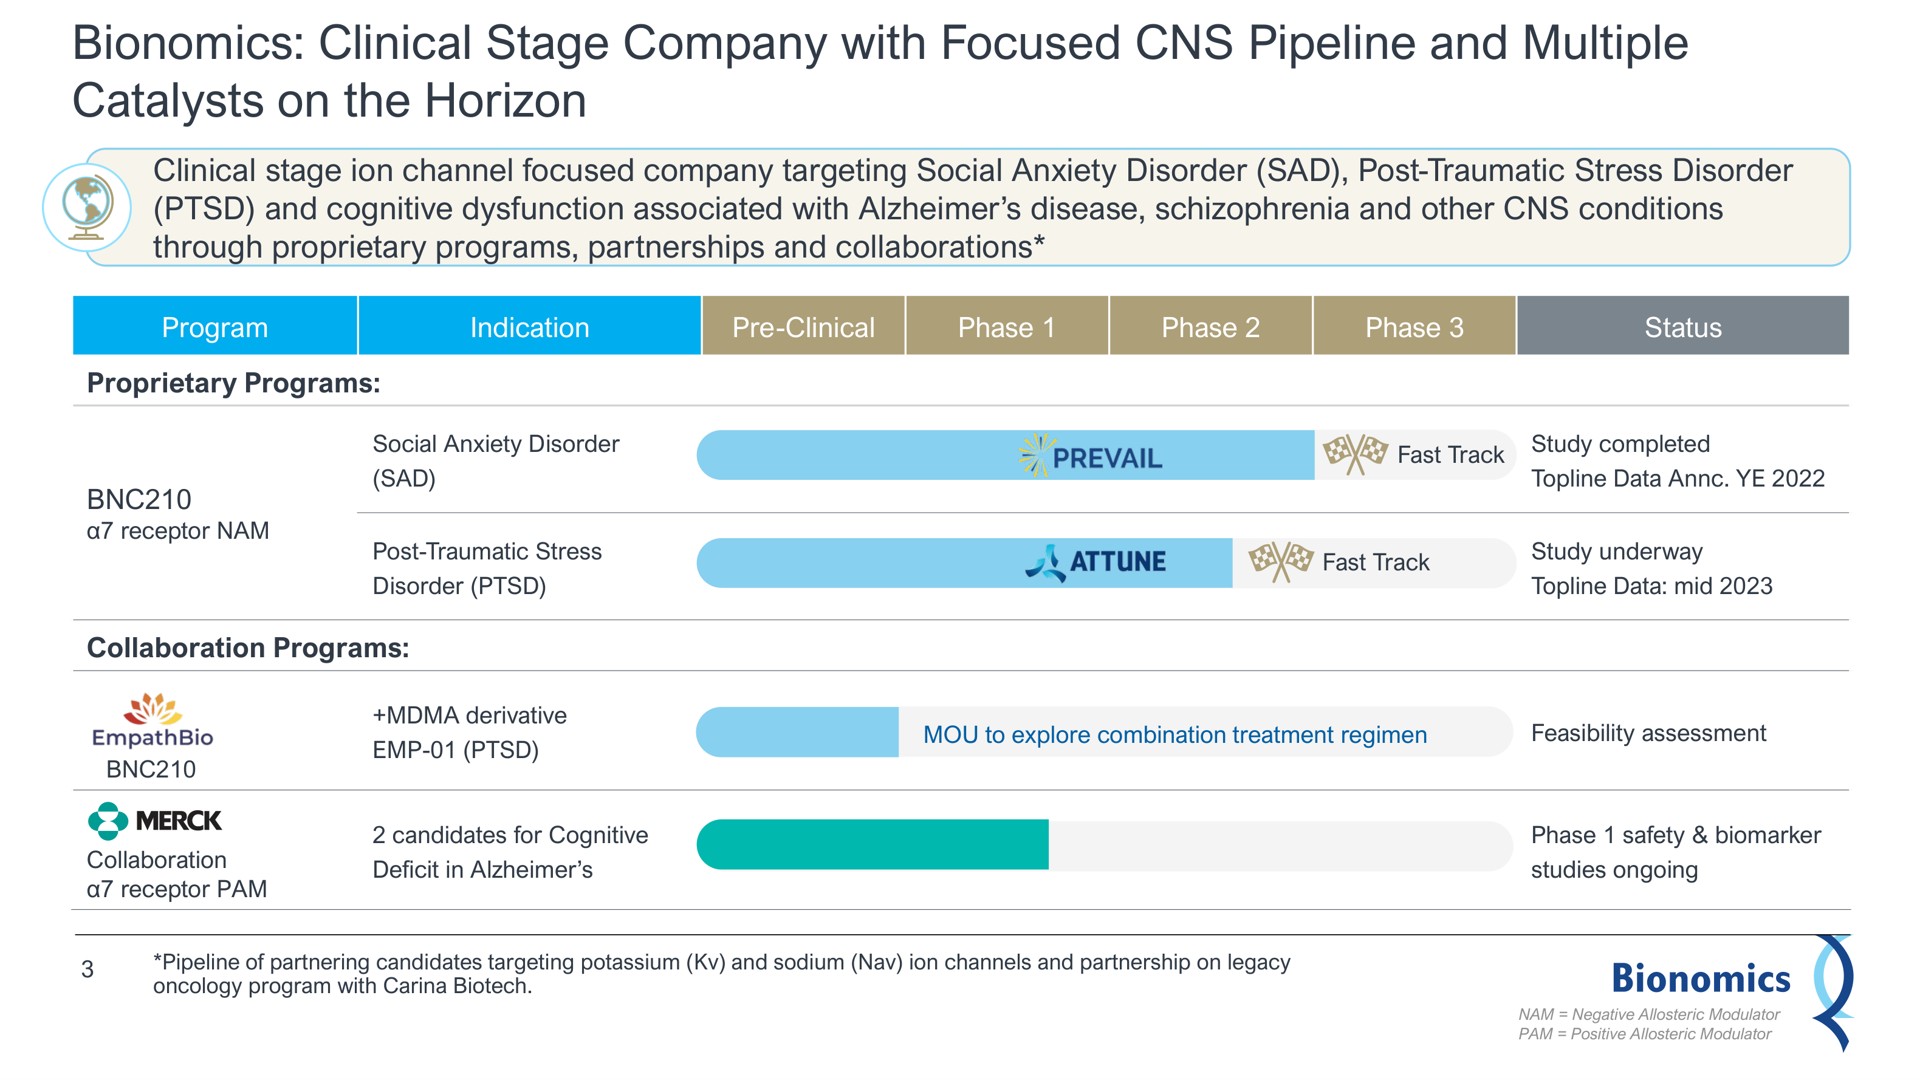 bionomics clinical stage company with focused pipeline and multiple catalysts on the horizon | Bionomics